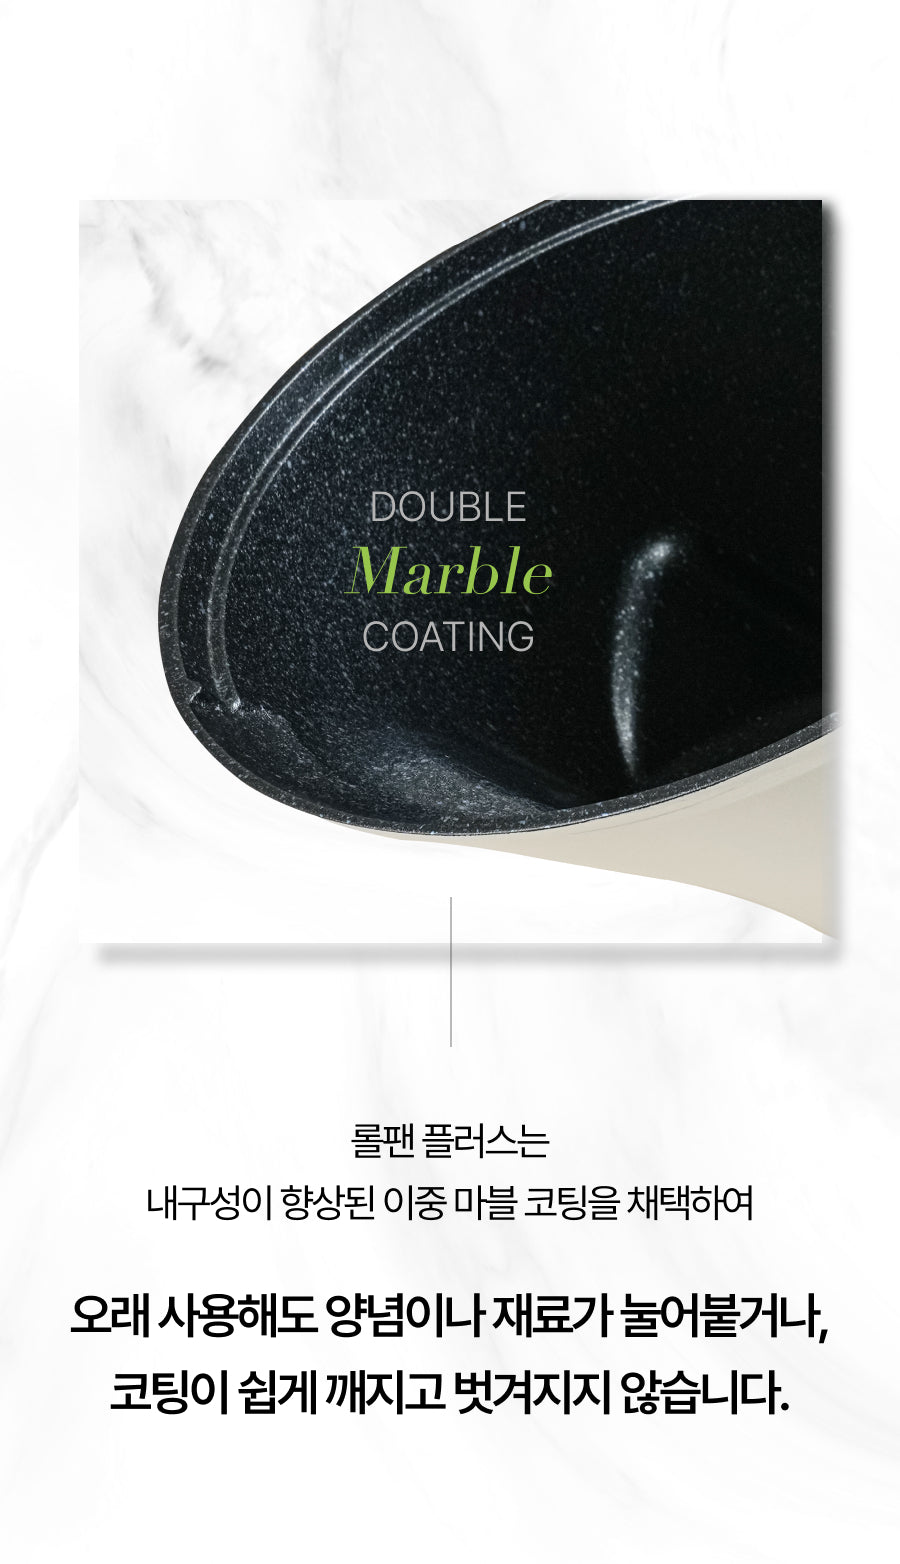 [New Model] Automatic Roll Pan Plus 자동회전 롤팬 플러스 2단 속도조절